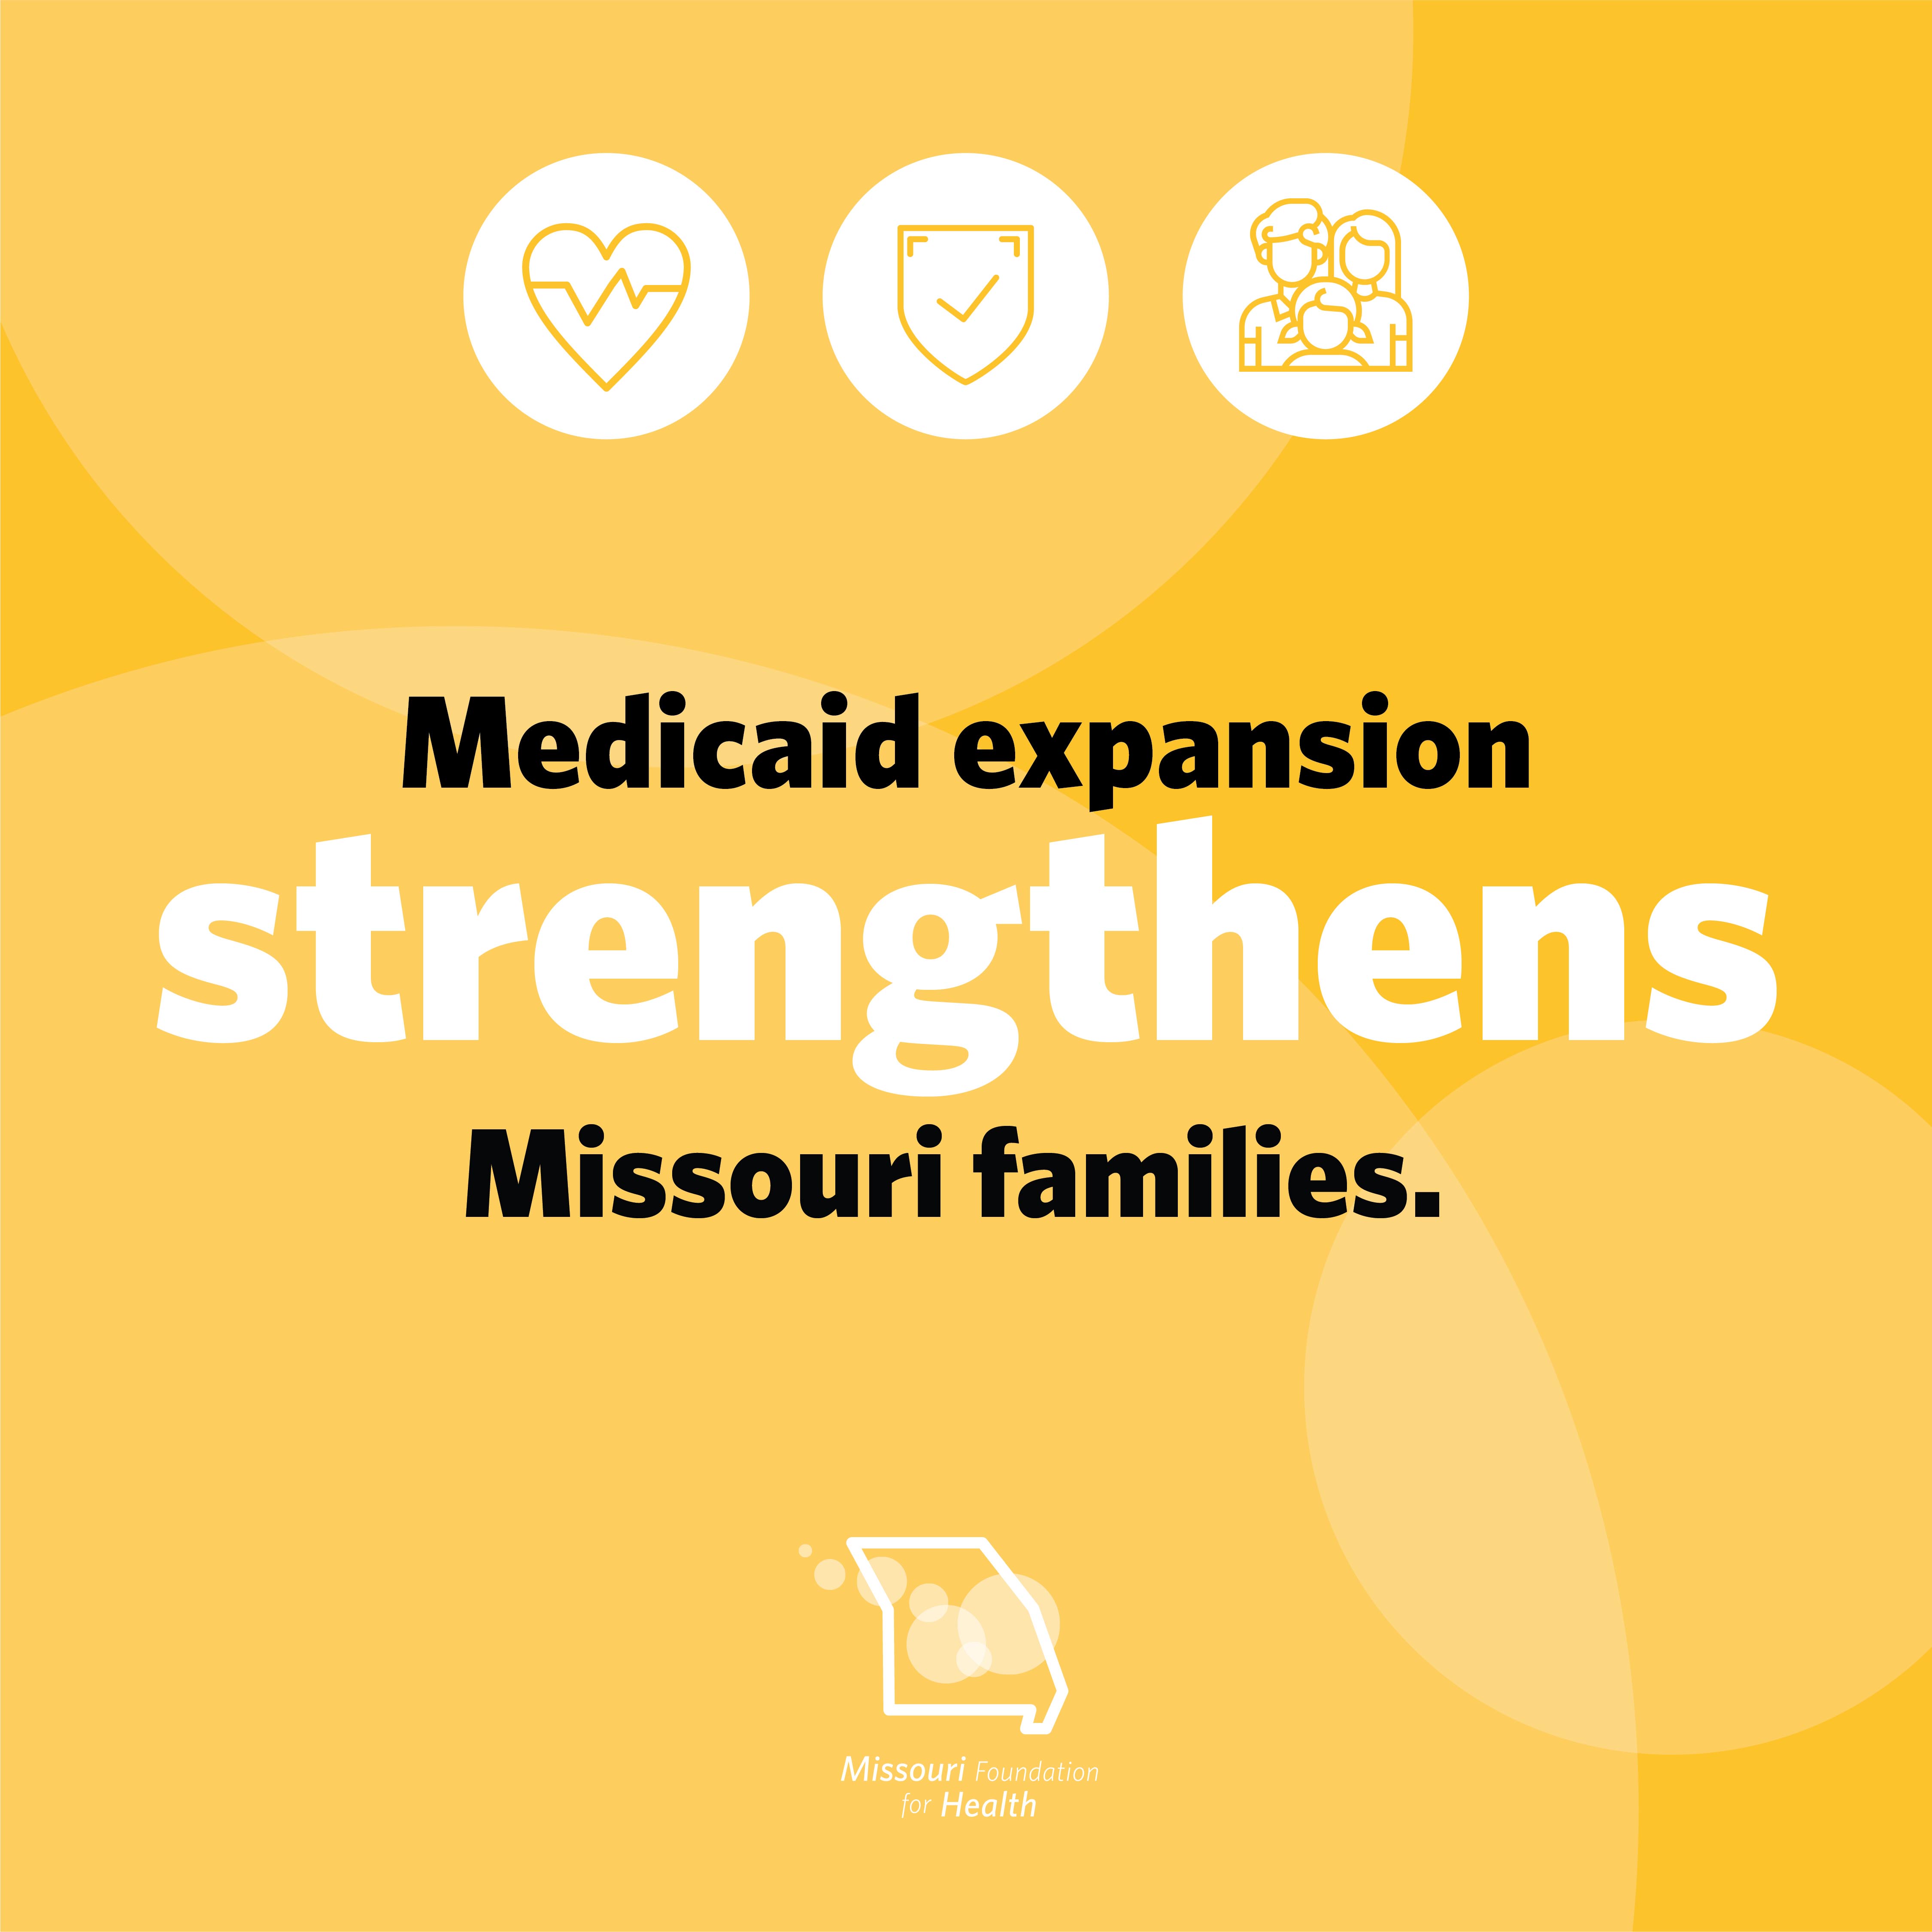 Graphic with icons of a heart with heartbeat, shield with checkmark, and family and text below that states Medicaid expansion strengthens Missouri families. with the Missouri Foundation for Health logo.